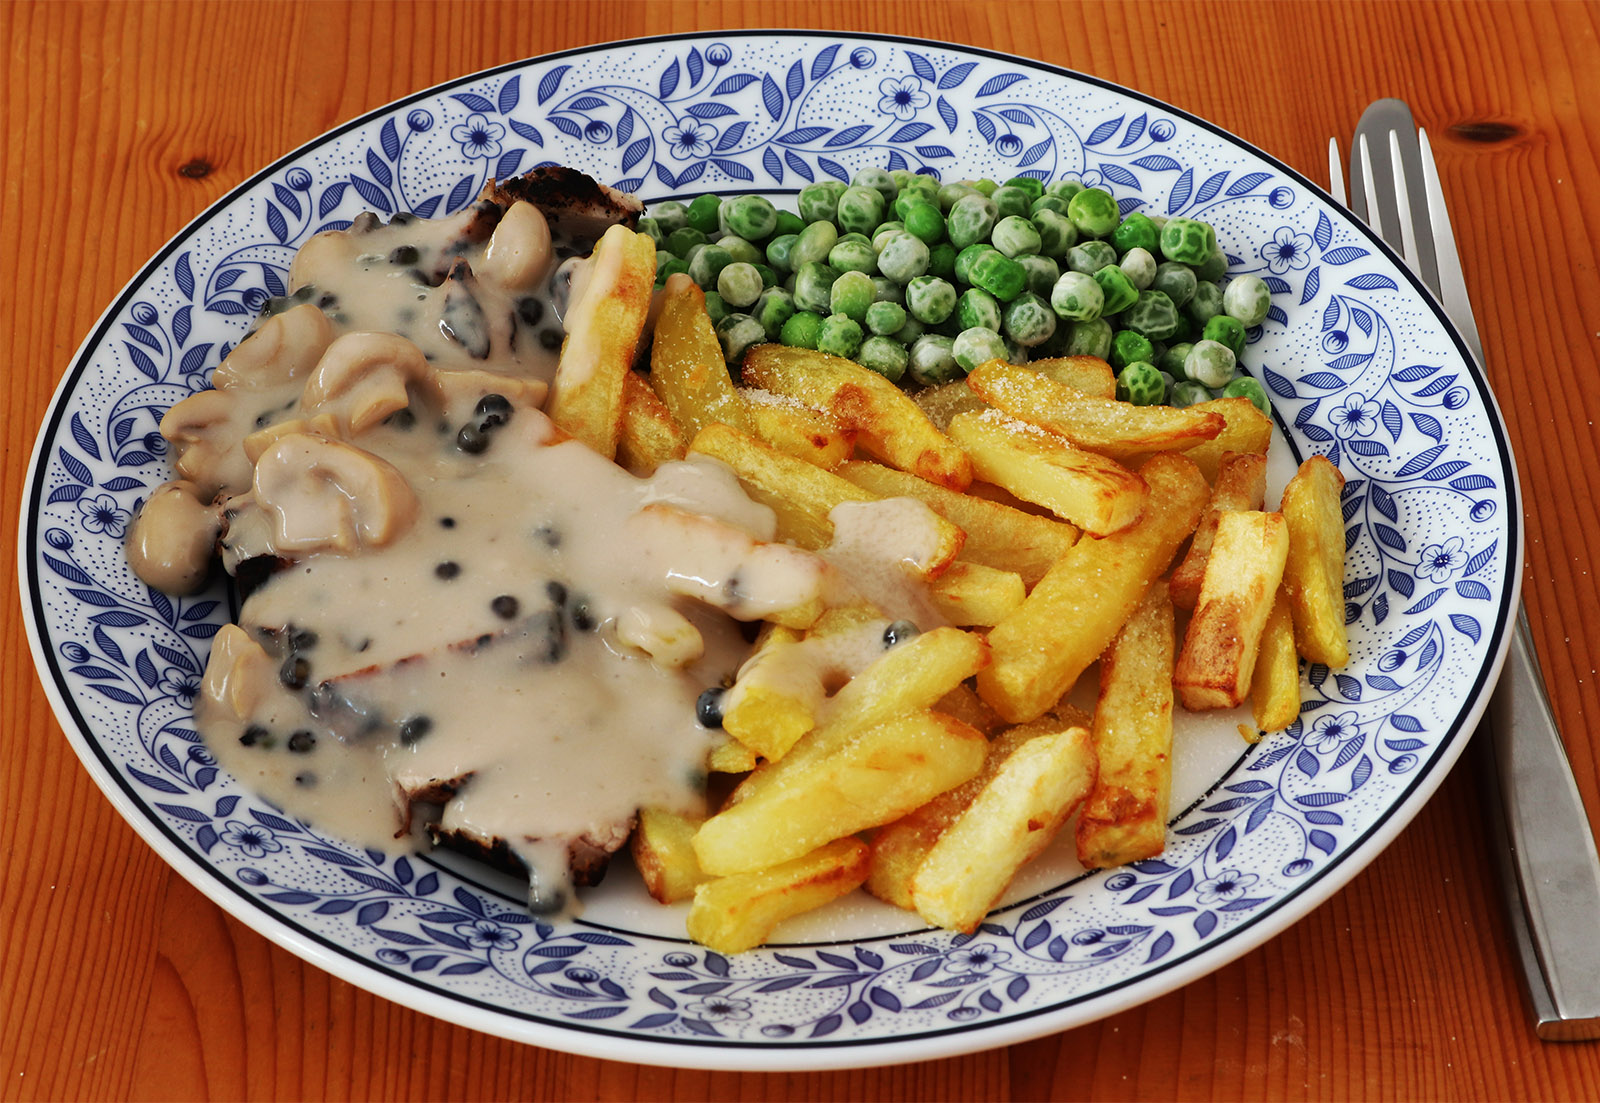 Pork loin with chips 2 s.jpg